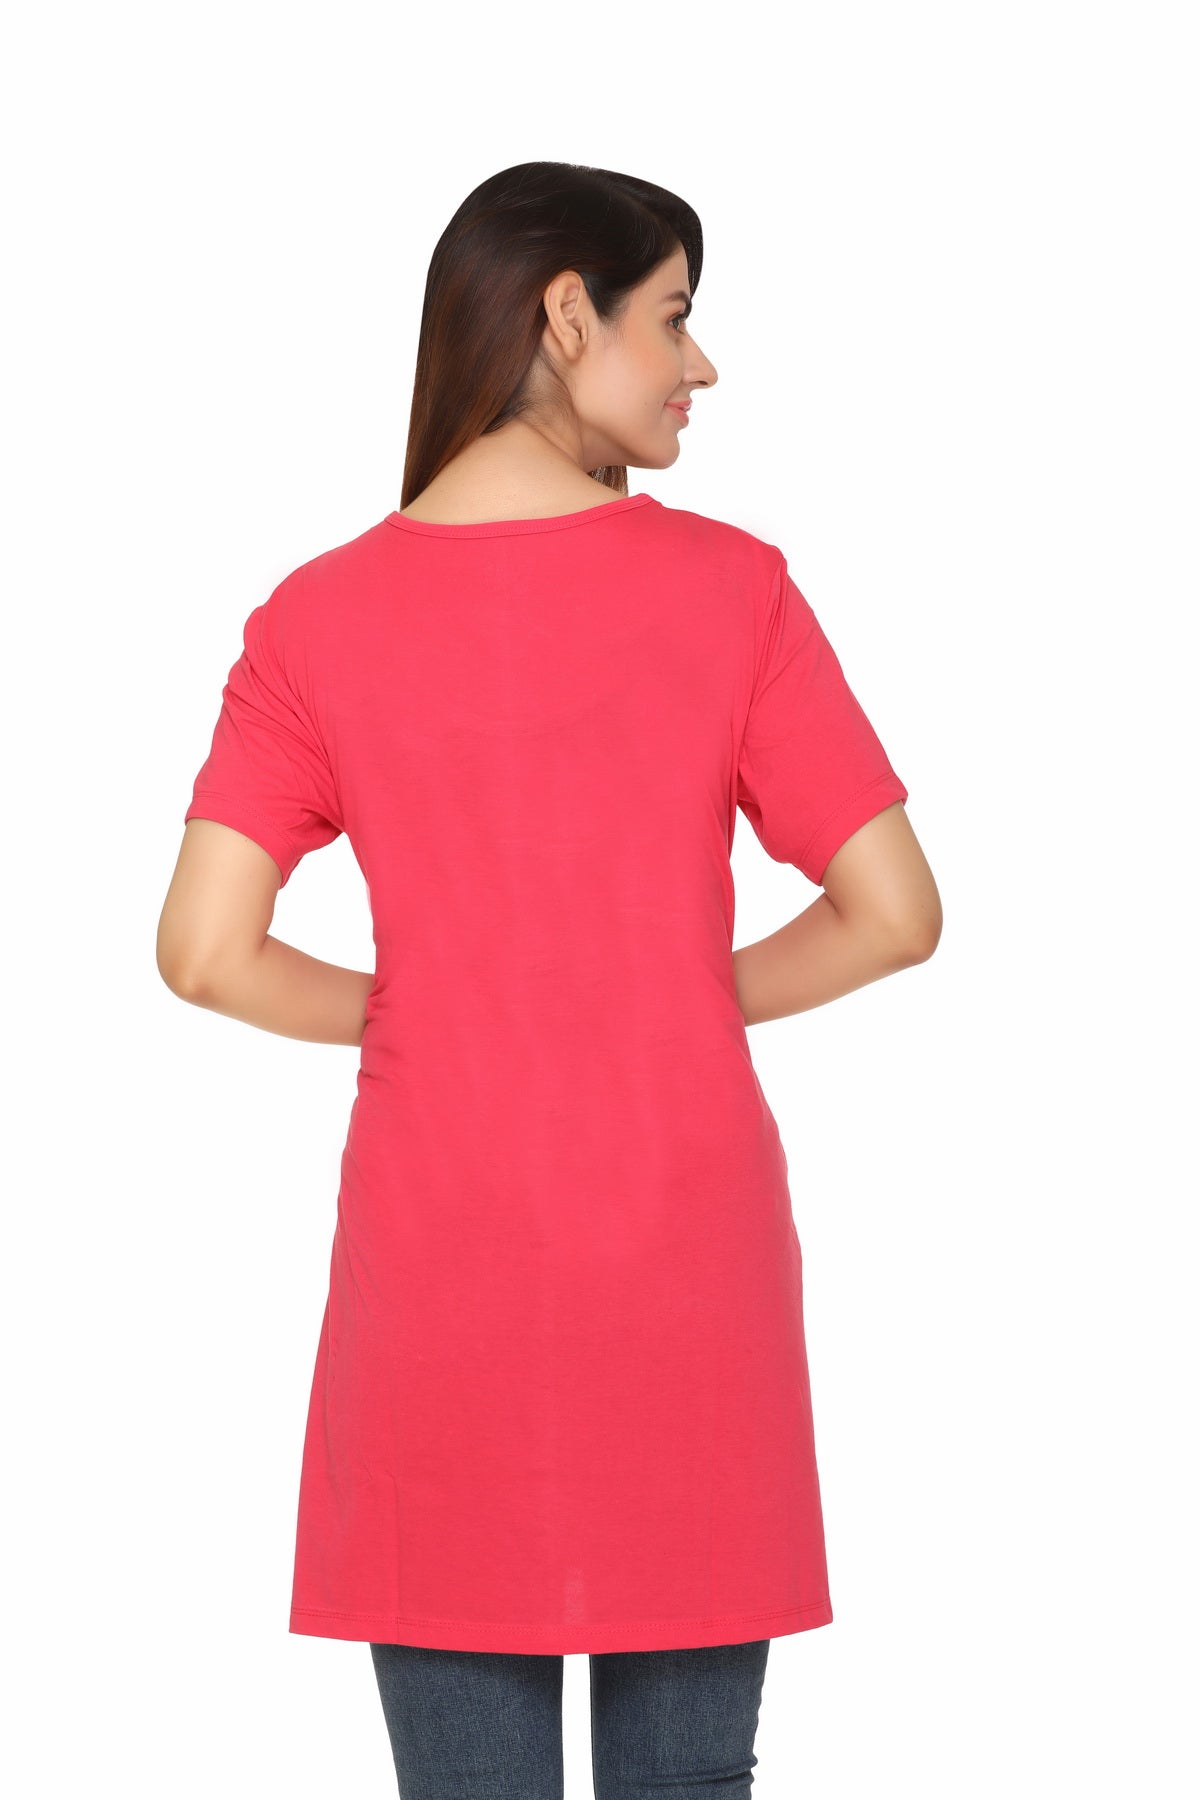 Plus Size Long T-shirt For Women - Half Sleeve - Punch Pink